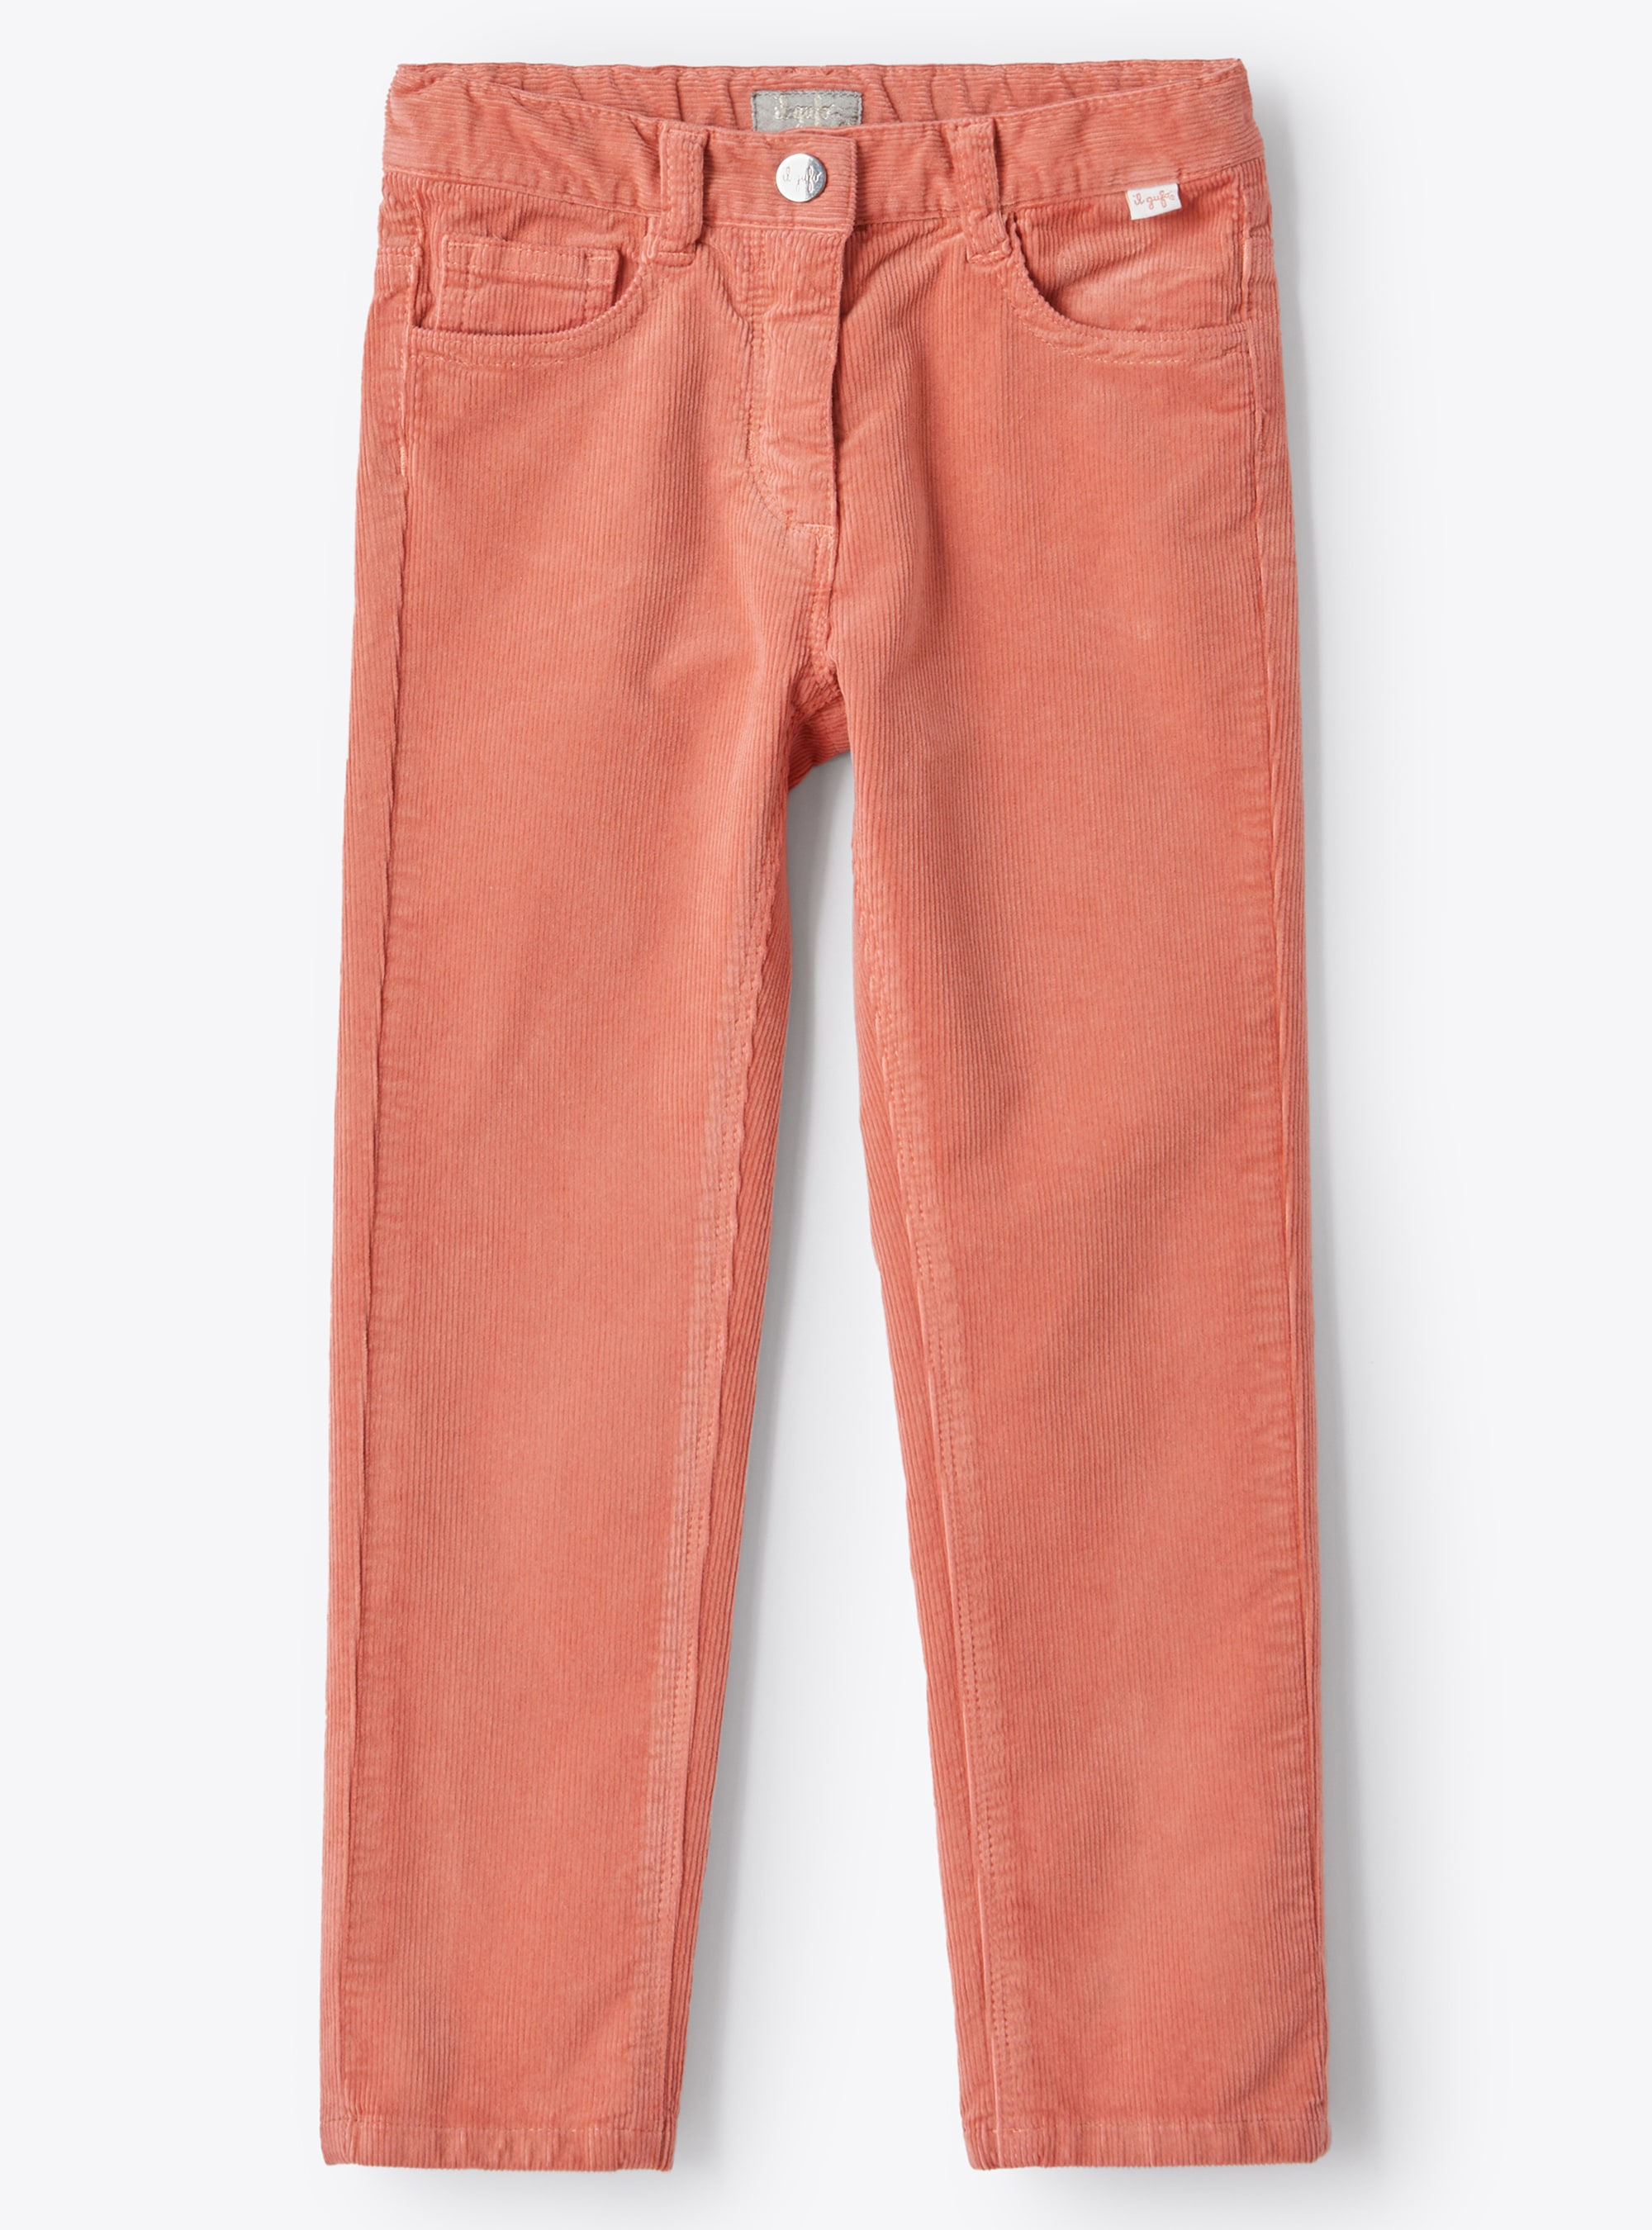 Slim fit pink corduroy trousers - Trousers - Il Gufo